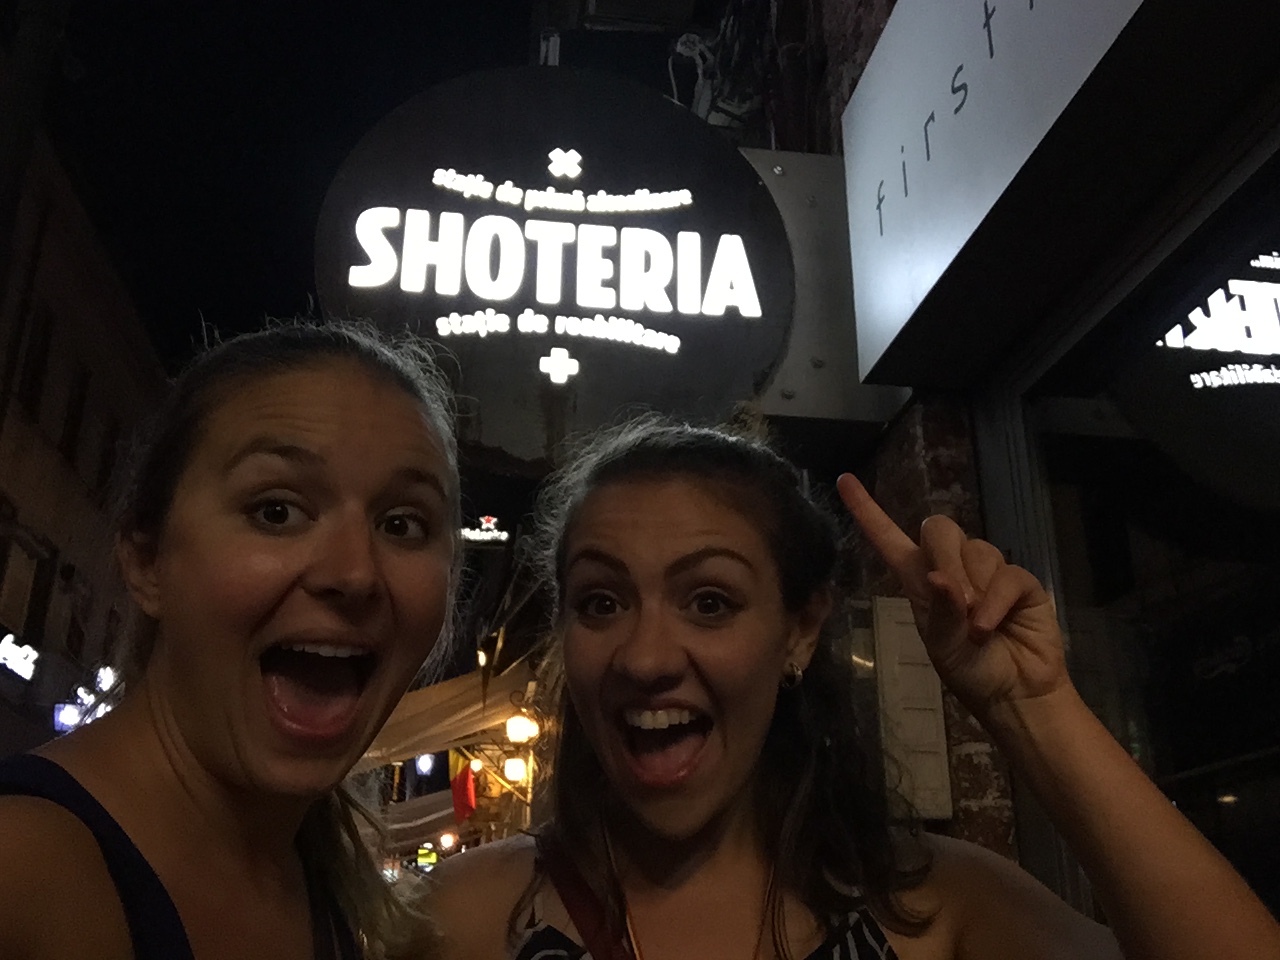 Shoteria - The latest craze in Bucharest. A bar that sells exclusively shots instead of cocktails.